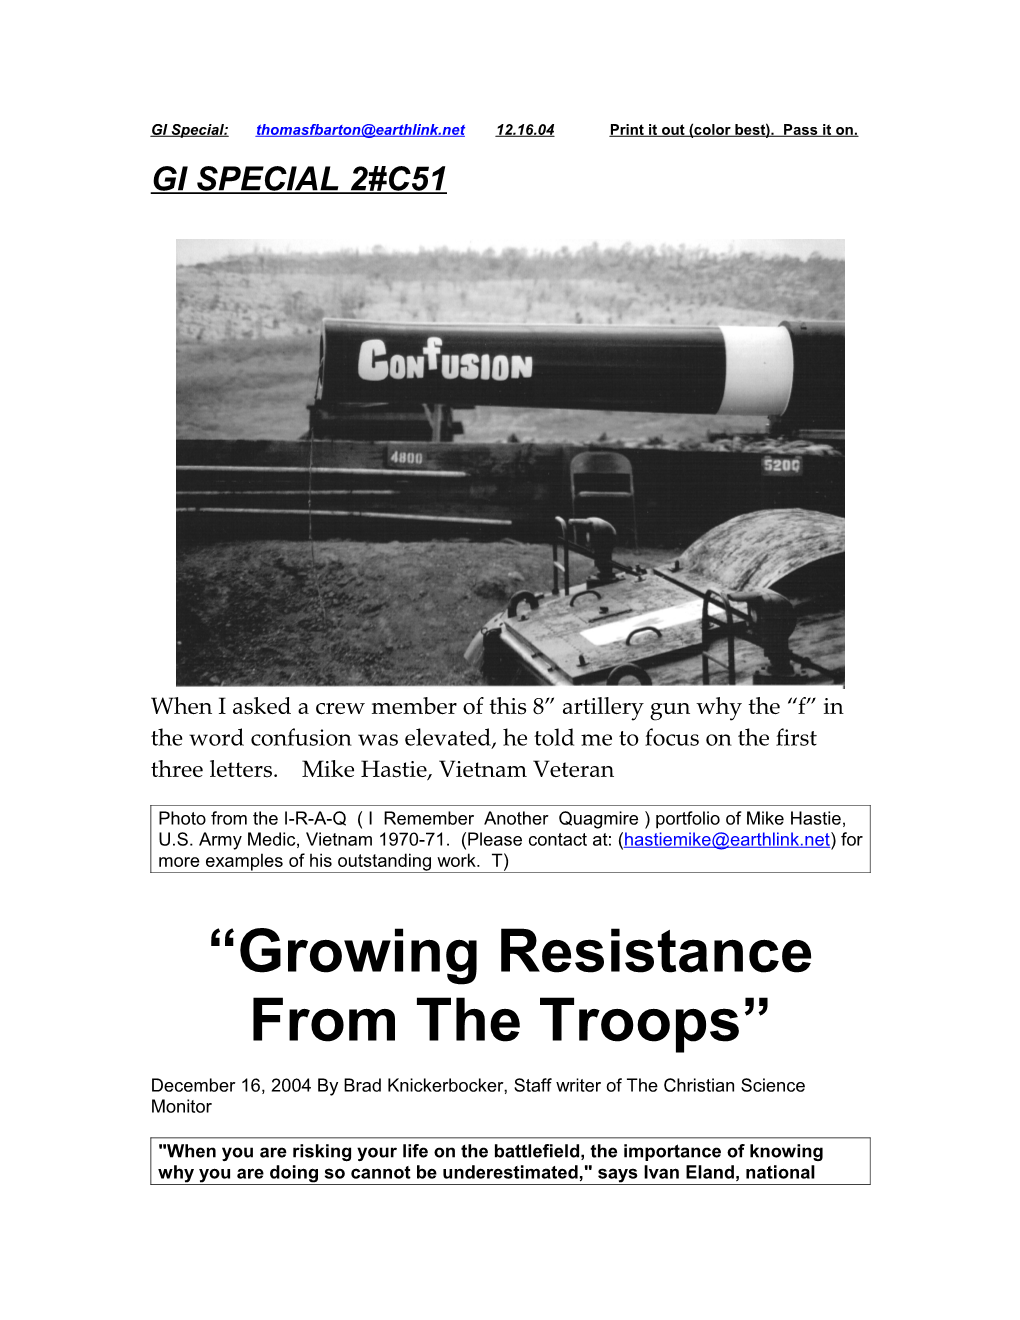 Growing Resistance from the Troops